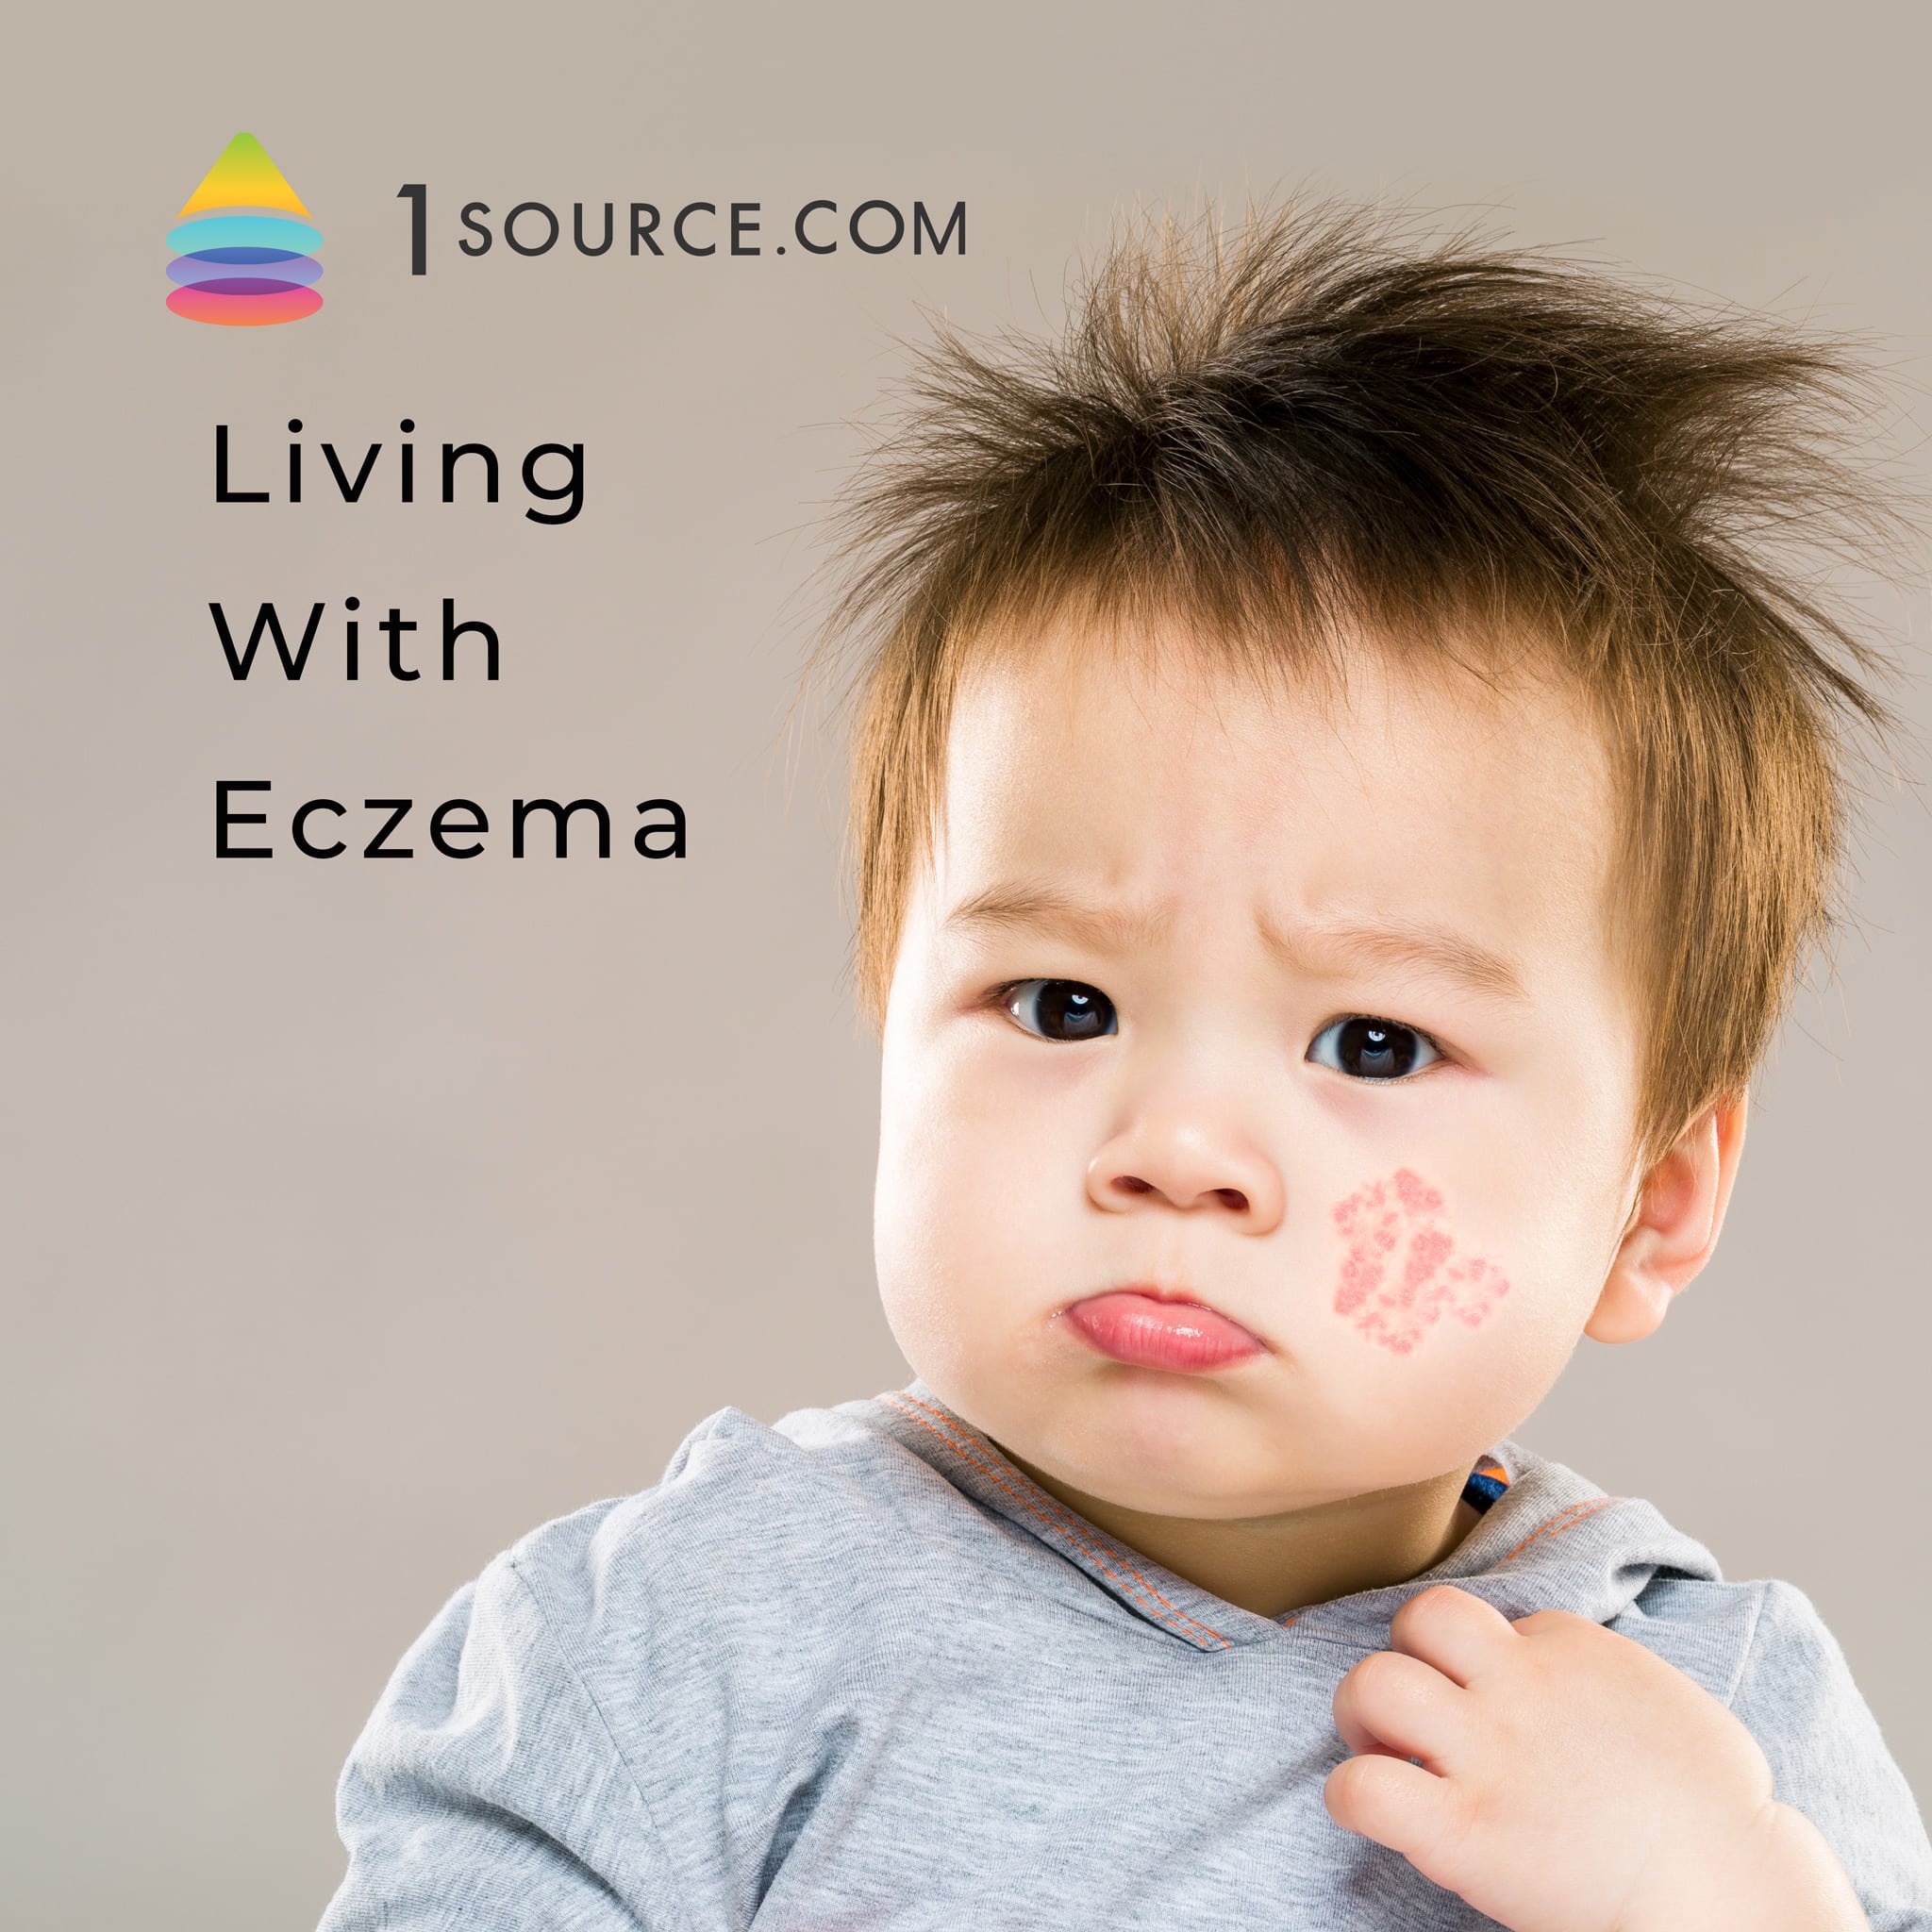 Living with Eczema